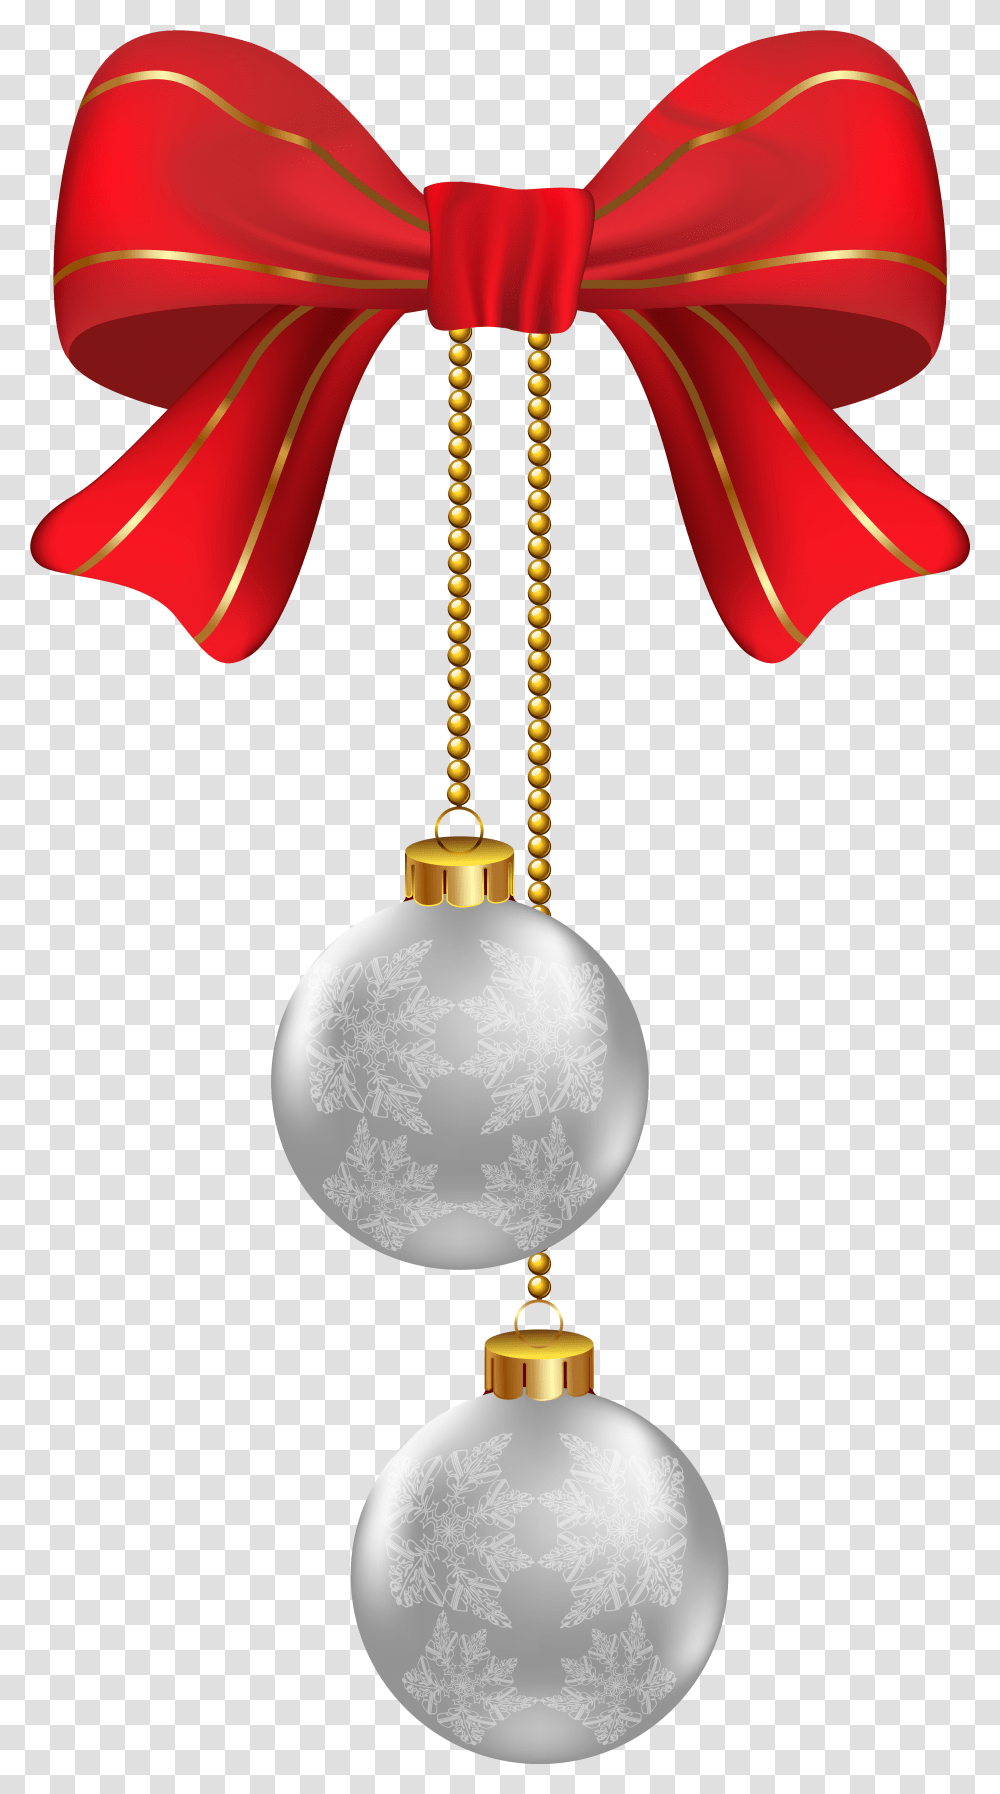 Hanging Christmas Ornaments Christmas Ornaments Background, Lamp, Pendant Transparent Png